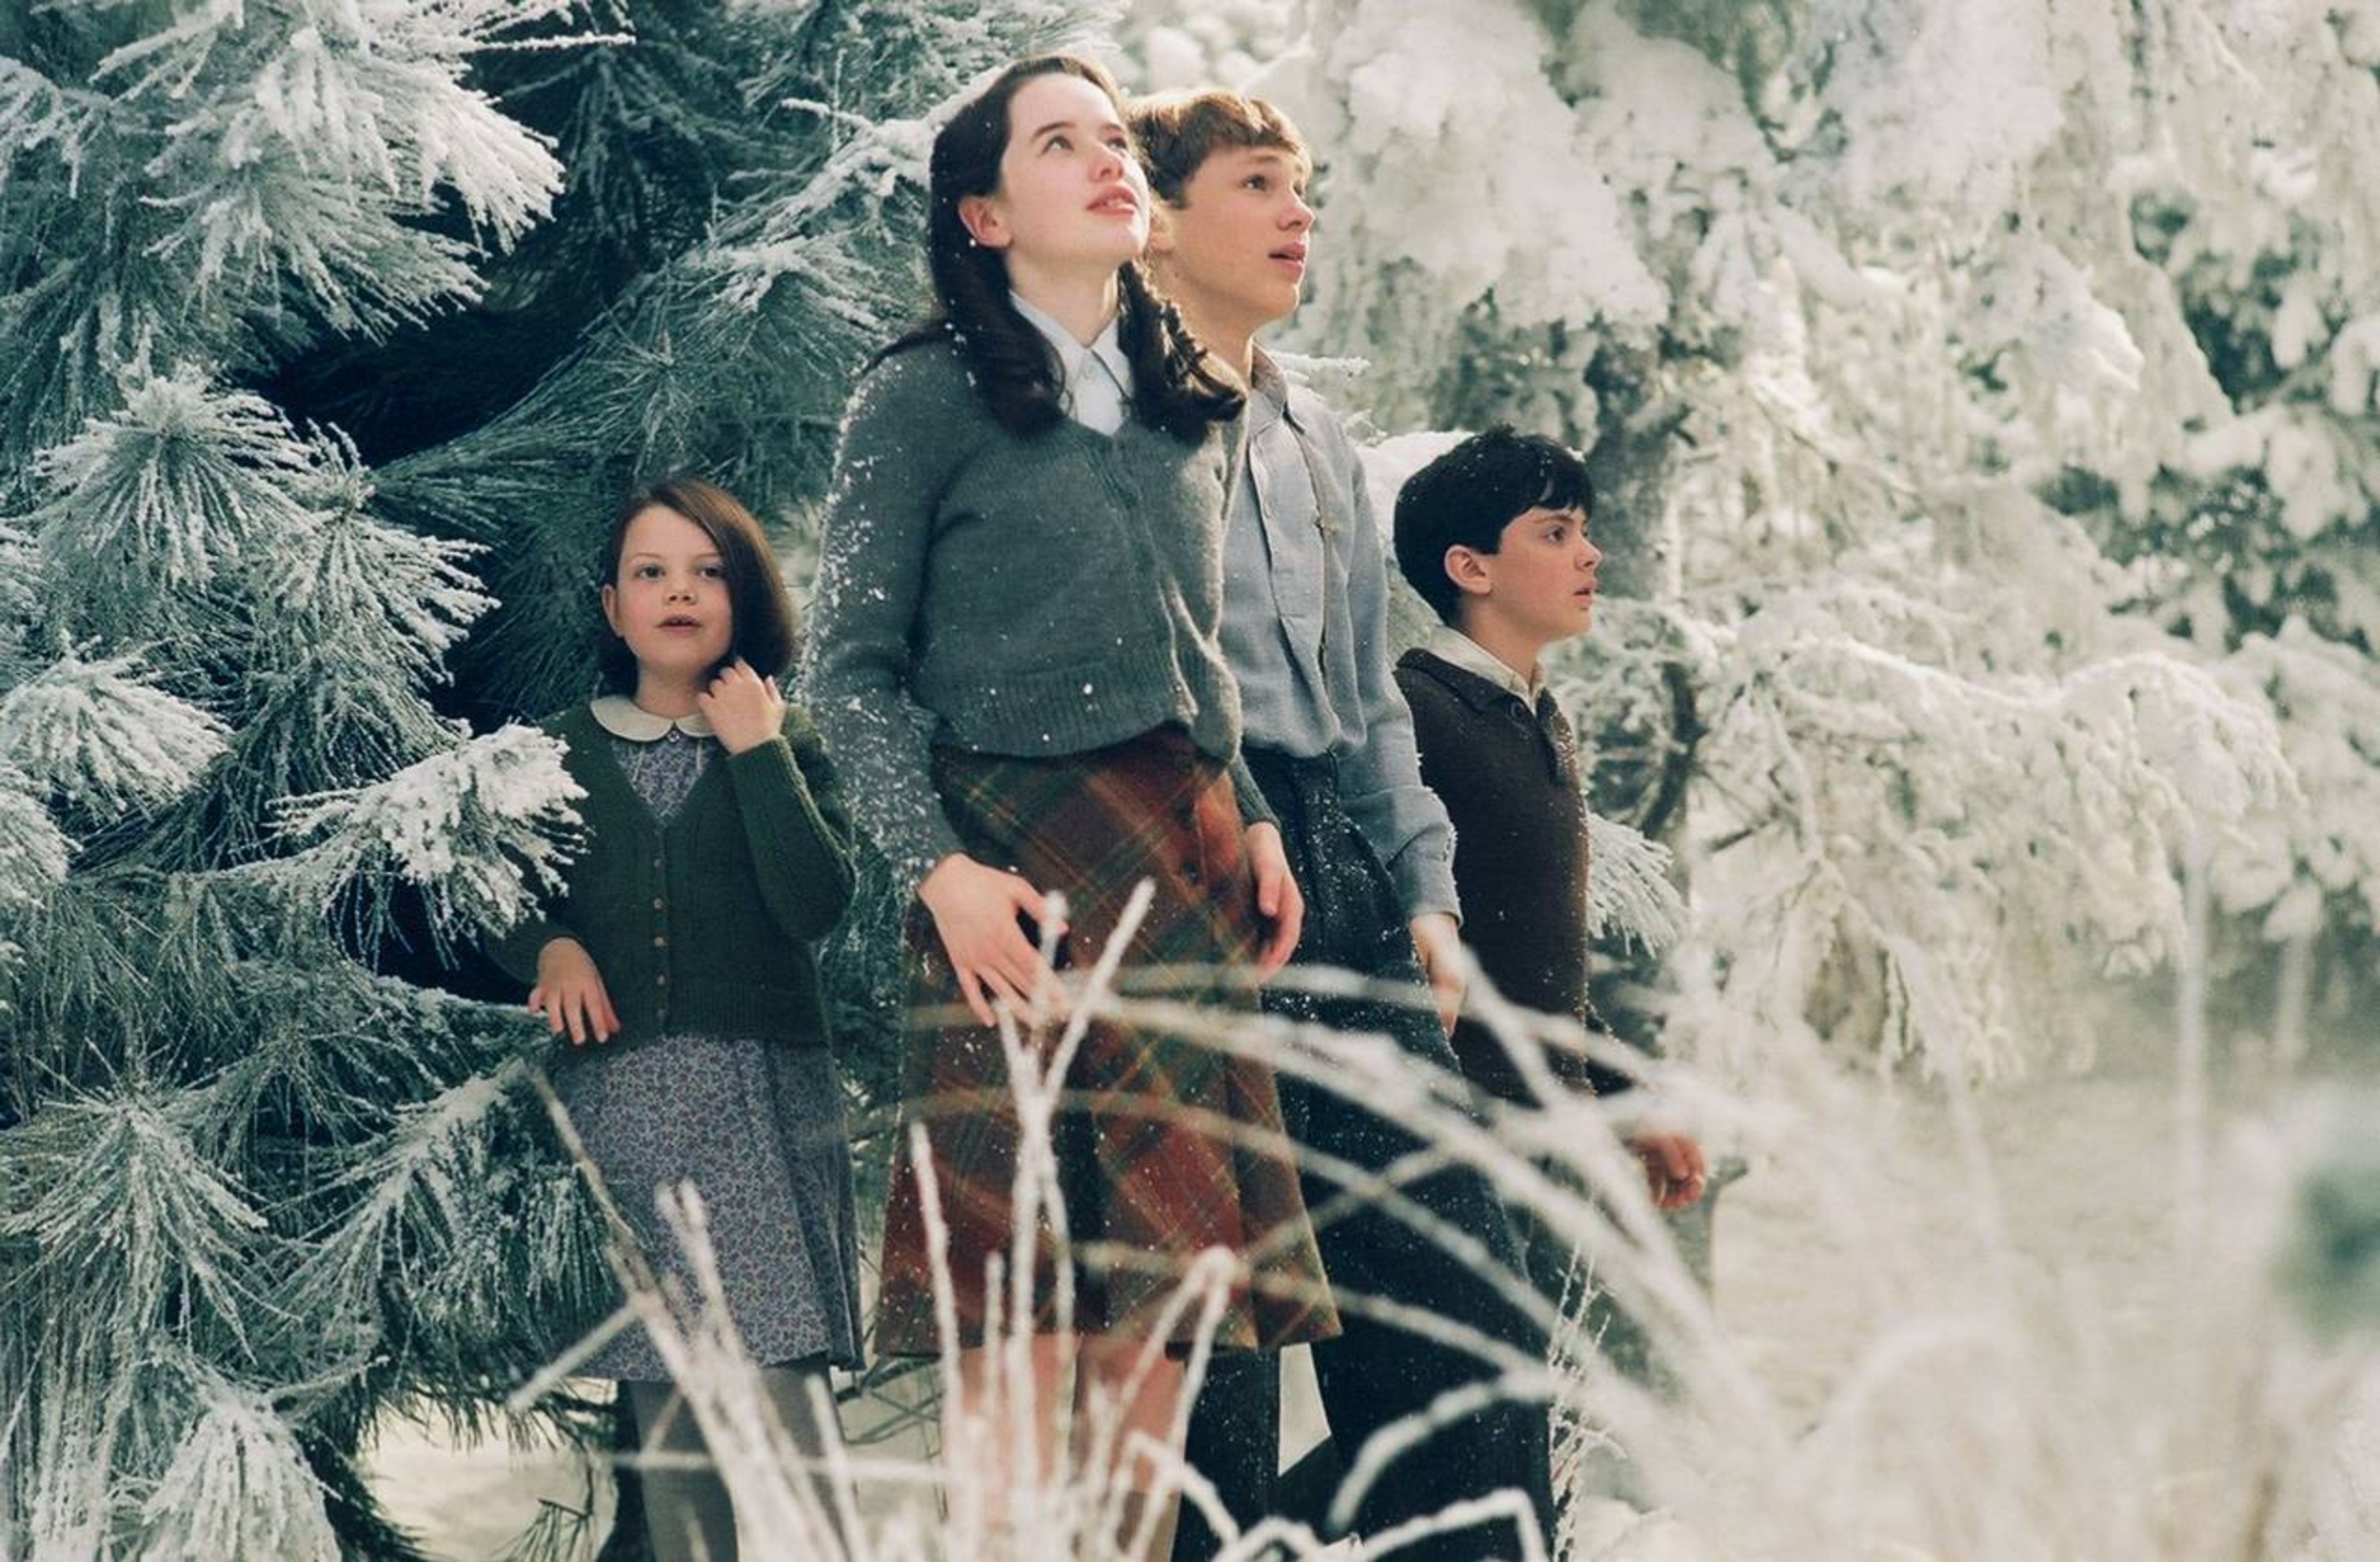 <p><em>The Chronicles of Narnia: The Lion, the Witch and the Wardrobe</em> was a magical book and a magical film. Seeing Narnia on screen was a fantastic experience for everyone who read the first installment of the novel series by C.S. Lewis. </p><p><a href='https://www.msn.com/en-us/community/channel/vid-cj9pqbr0vn9in2b6ddcd8sfgpfq6x6utp44fssrv6mc2gtybw0us'>Follow us on MSN to see more of our exclusive entertainment content.</a></p>